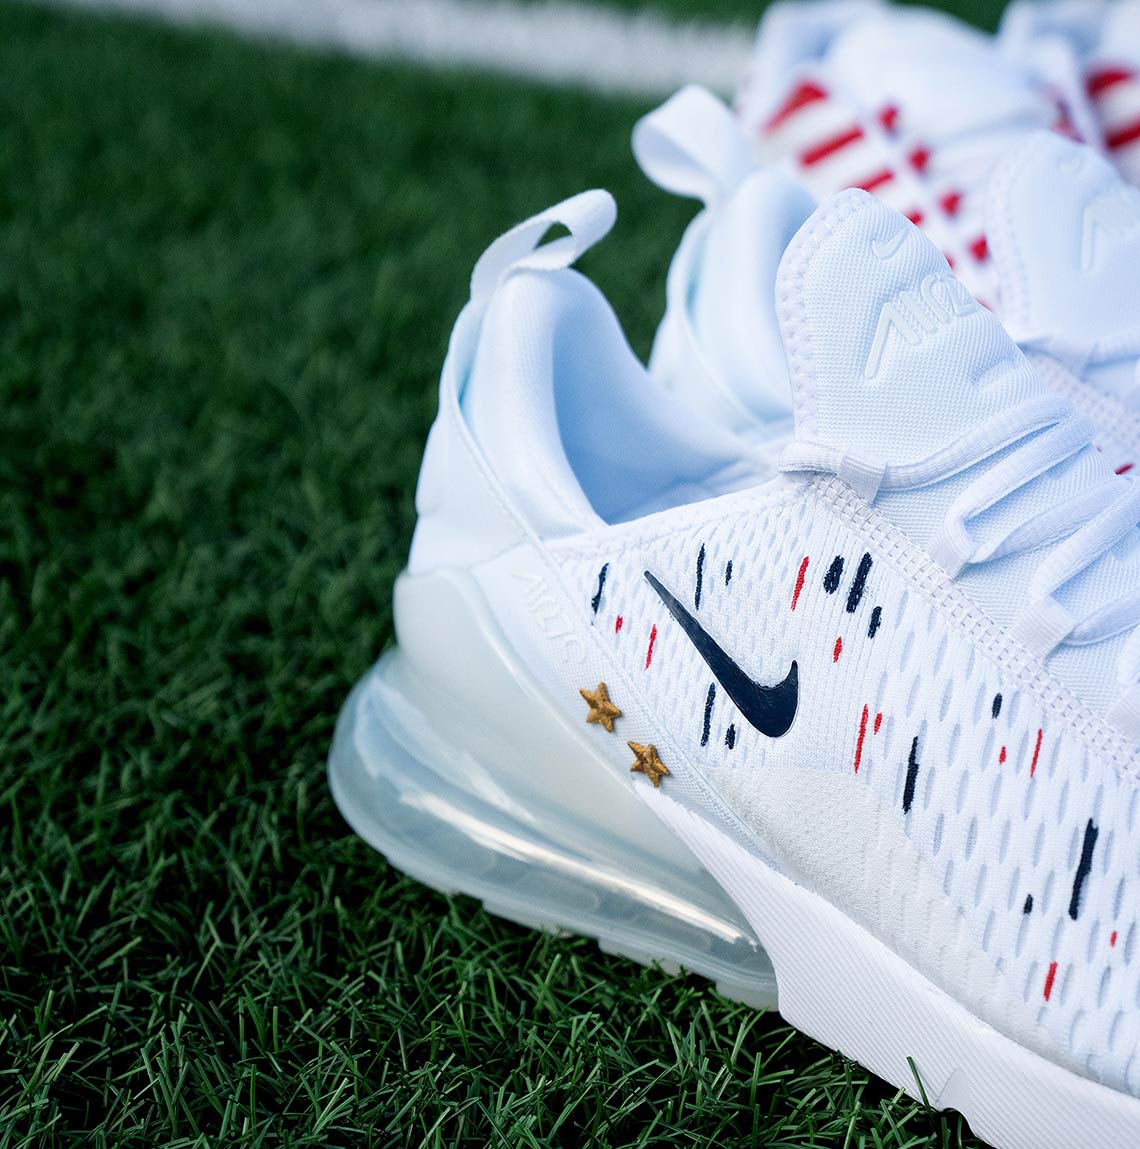 Kylian Mbappe World Cup Air Sneakers SneakerNews.com